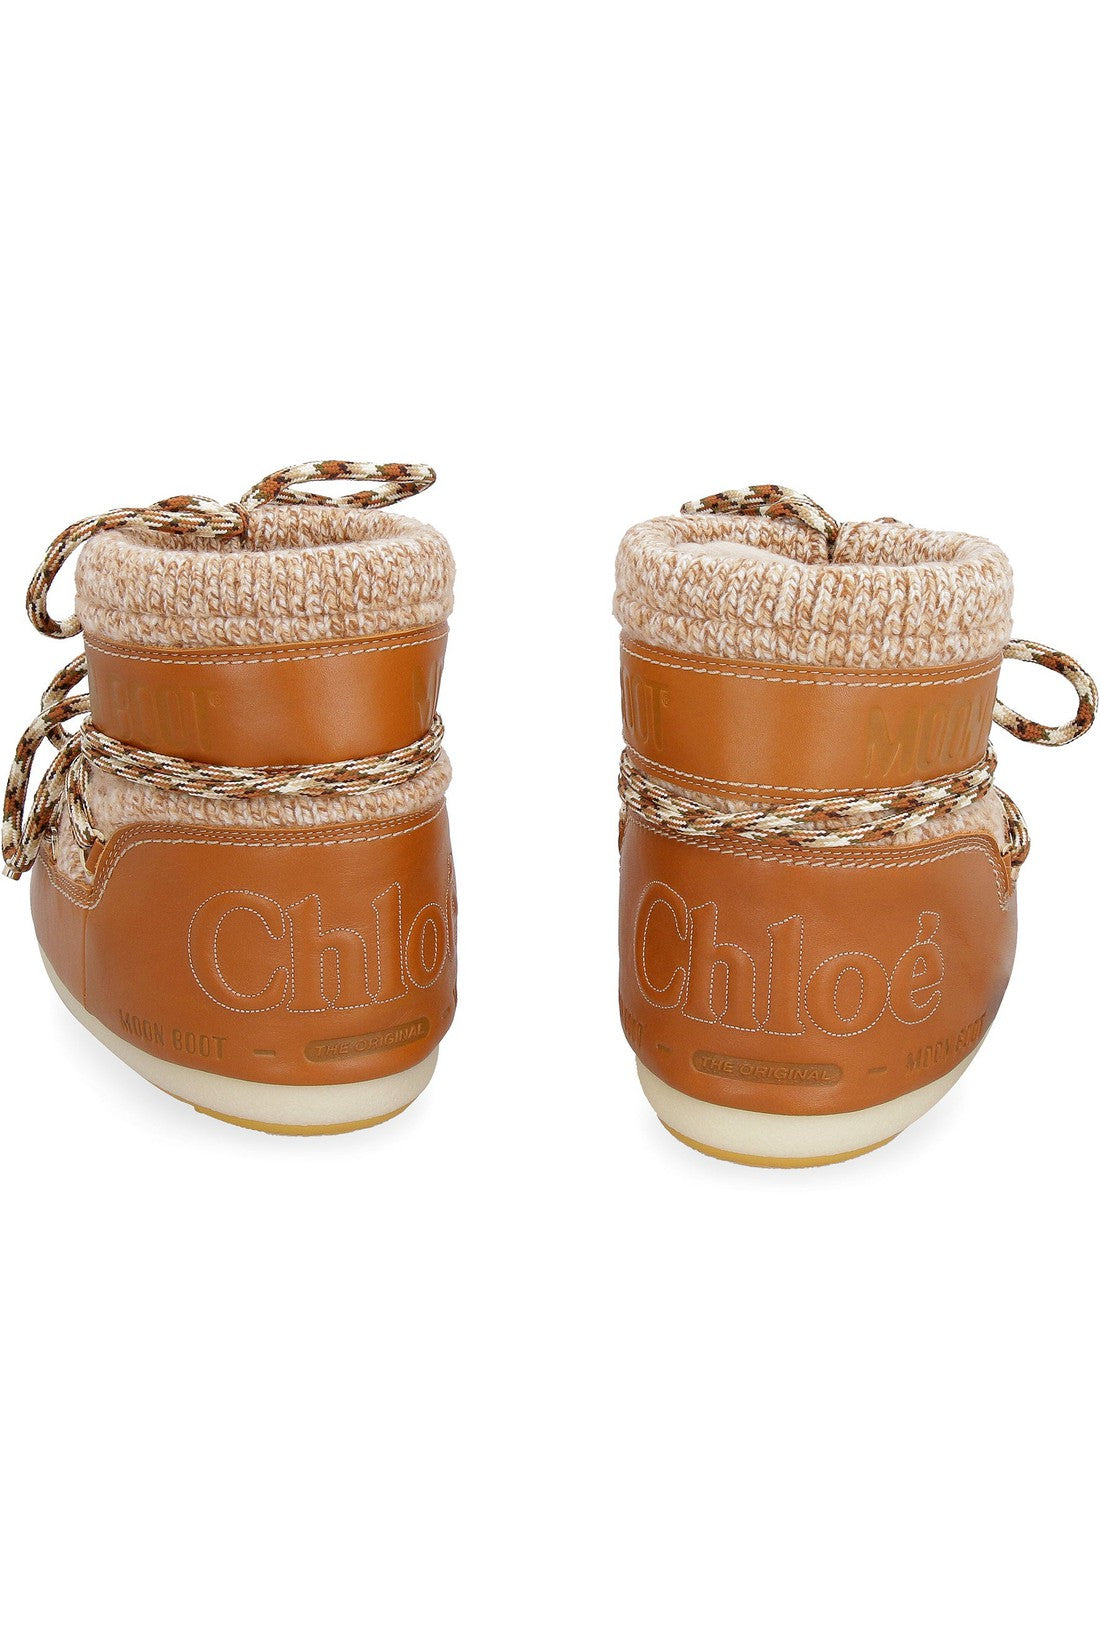 Chloé-OUTLET-SALE-Chloé x Moon Boot - Leather and knit Moon Boots-ARCHIVIST